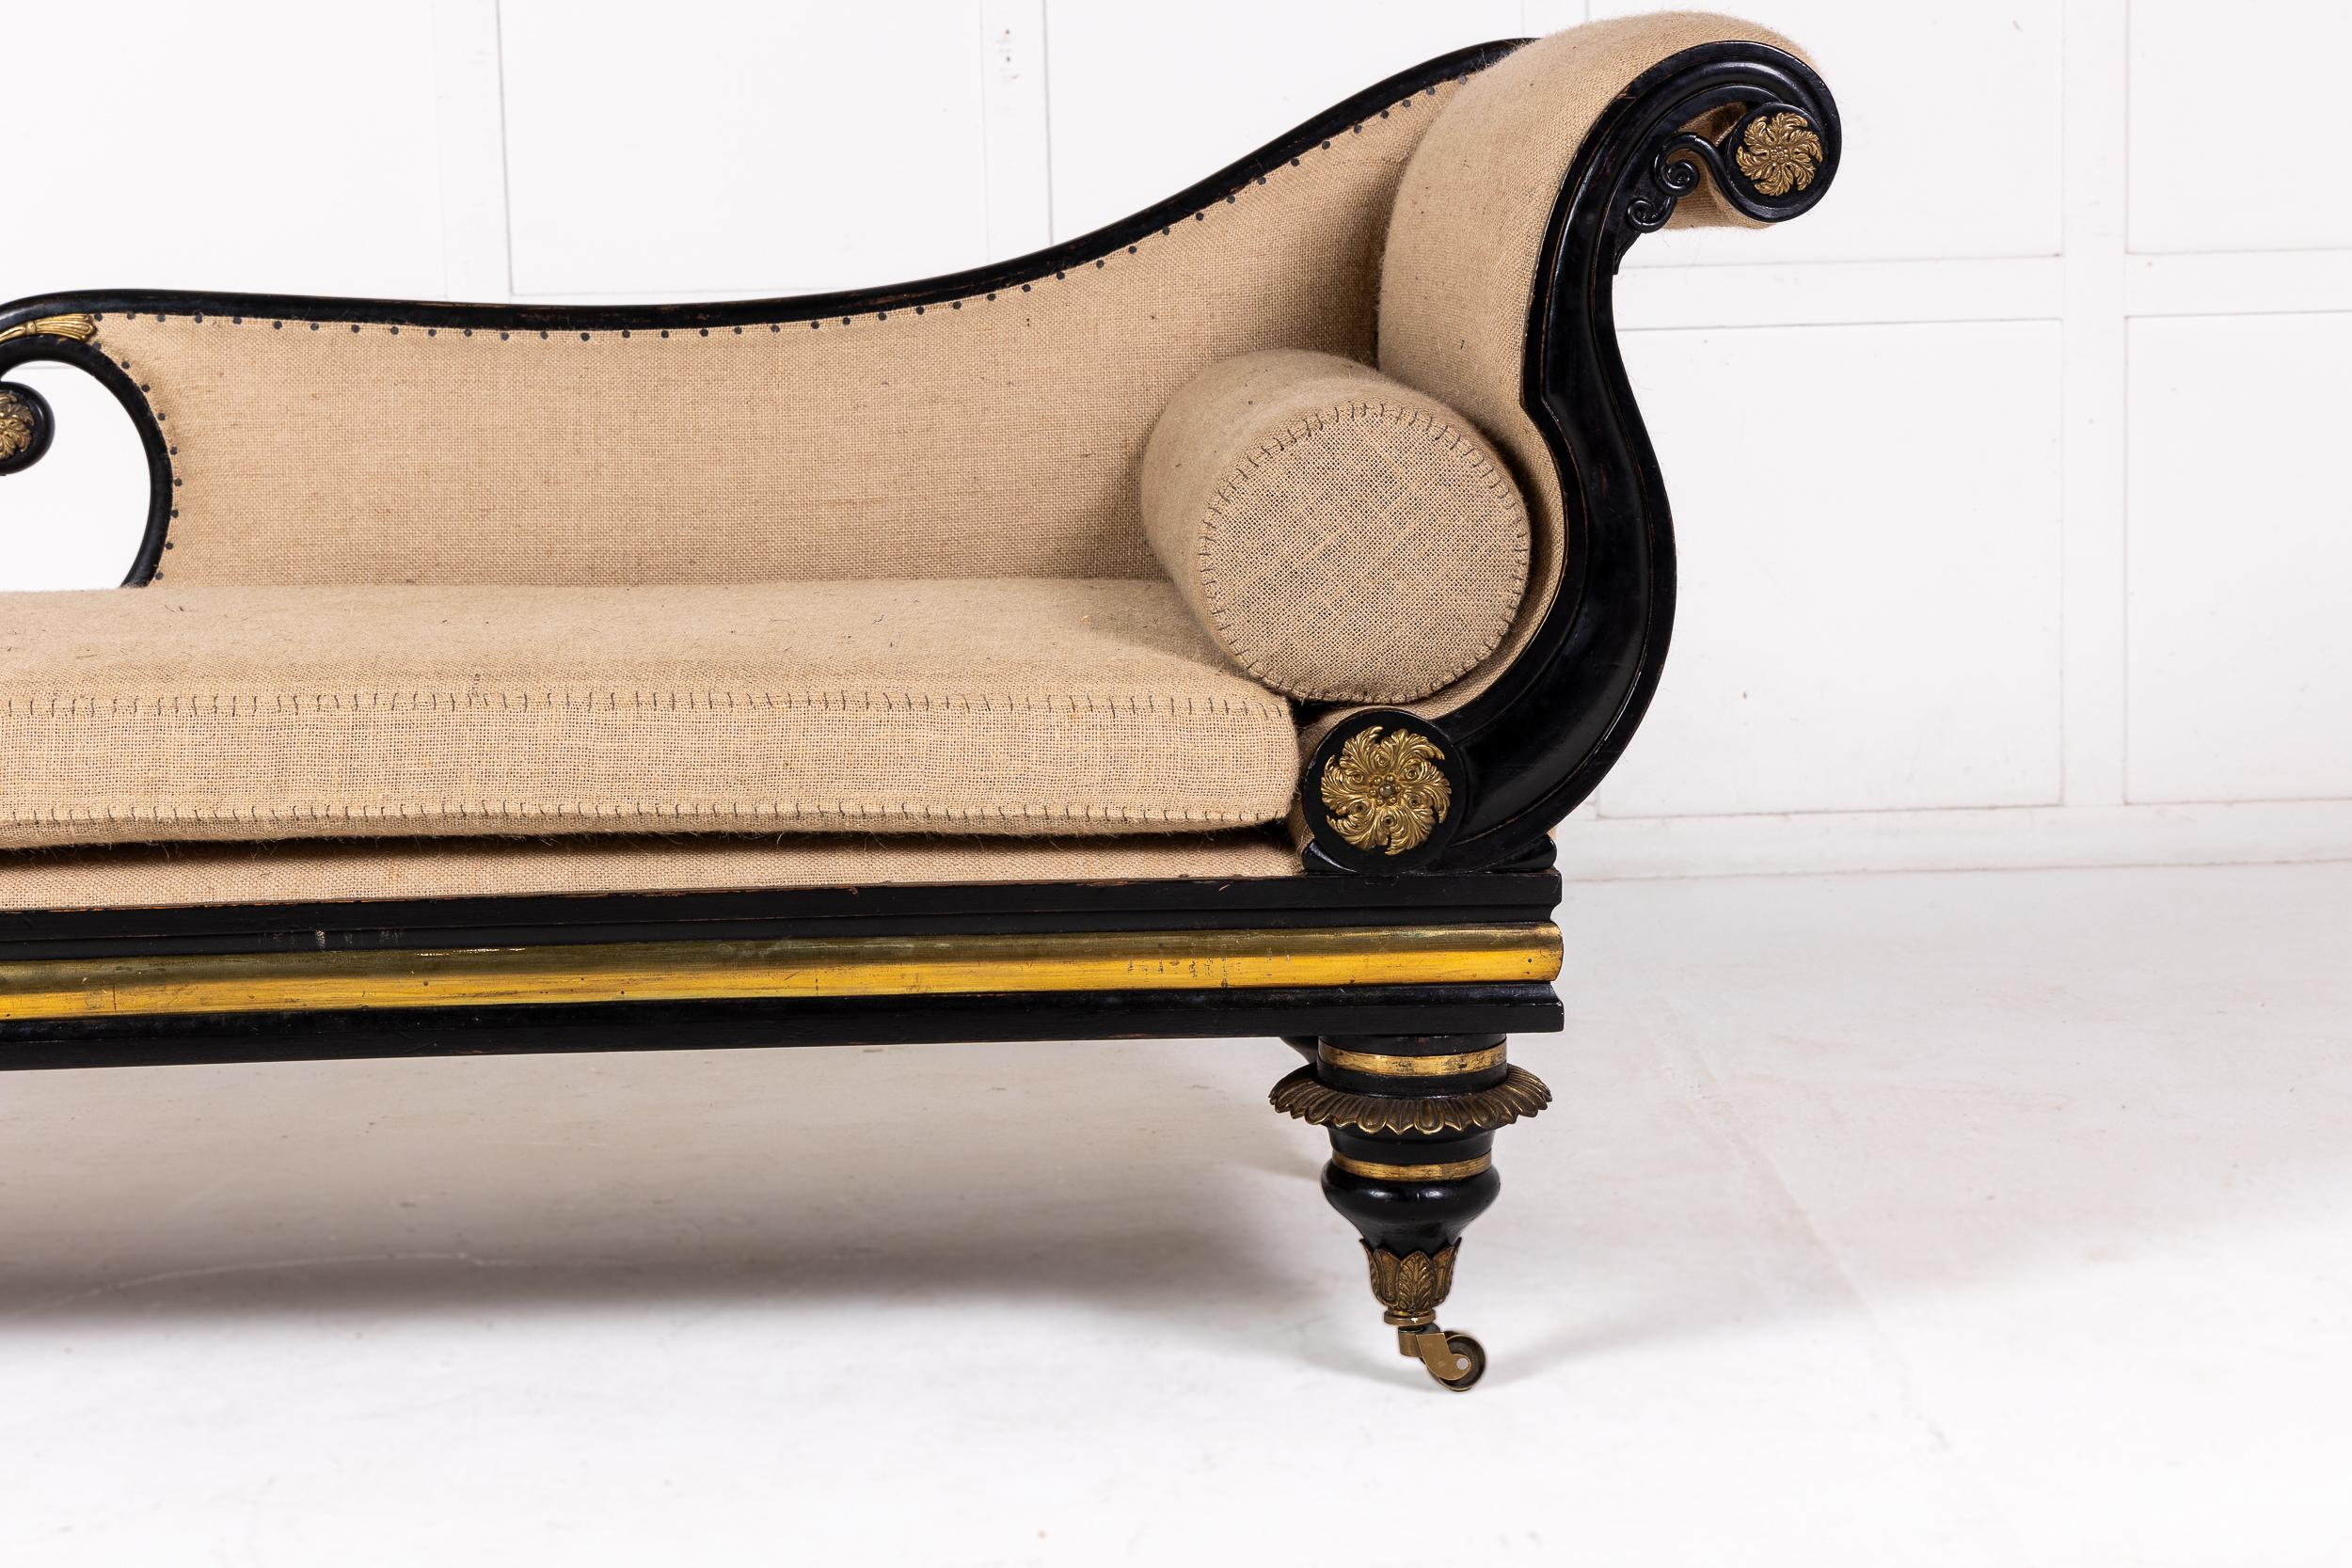 A Very Impressive Regency Period Ebonised Chaise Longue or Daybed with Gilt Brass Mounts.

Conceived in the high regency taste, and of that period, this chaise has beautiful flowing lines and the black and gold colour scheme that was so popular at